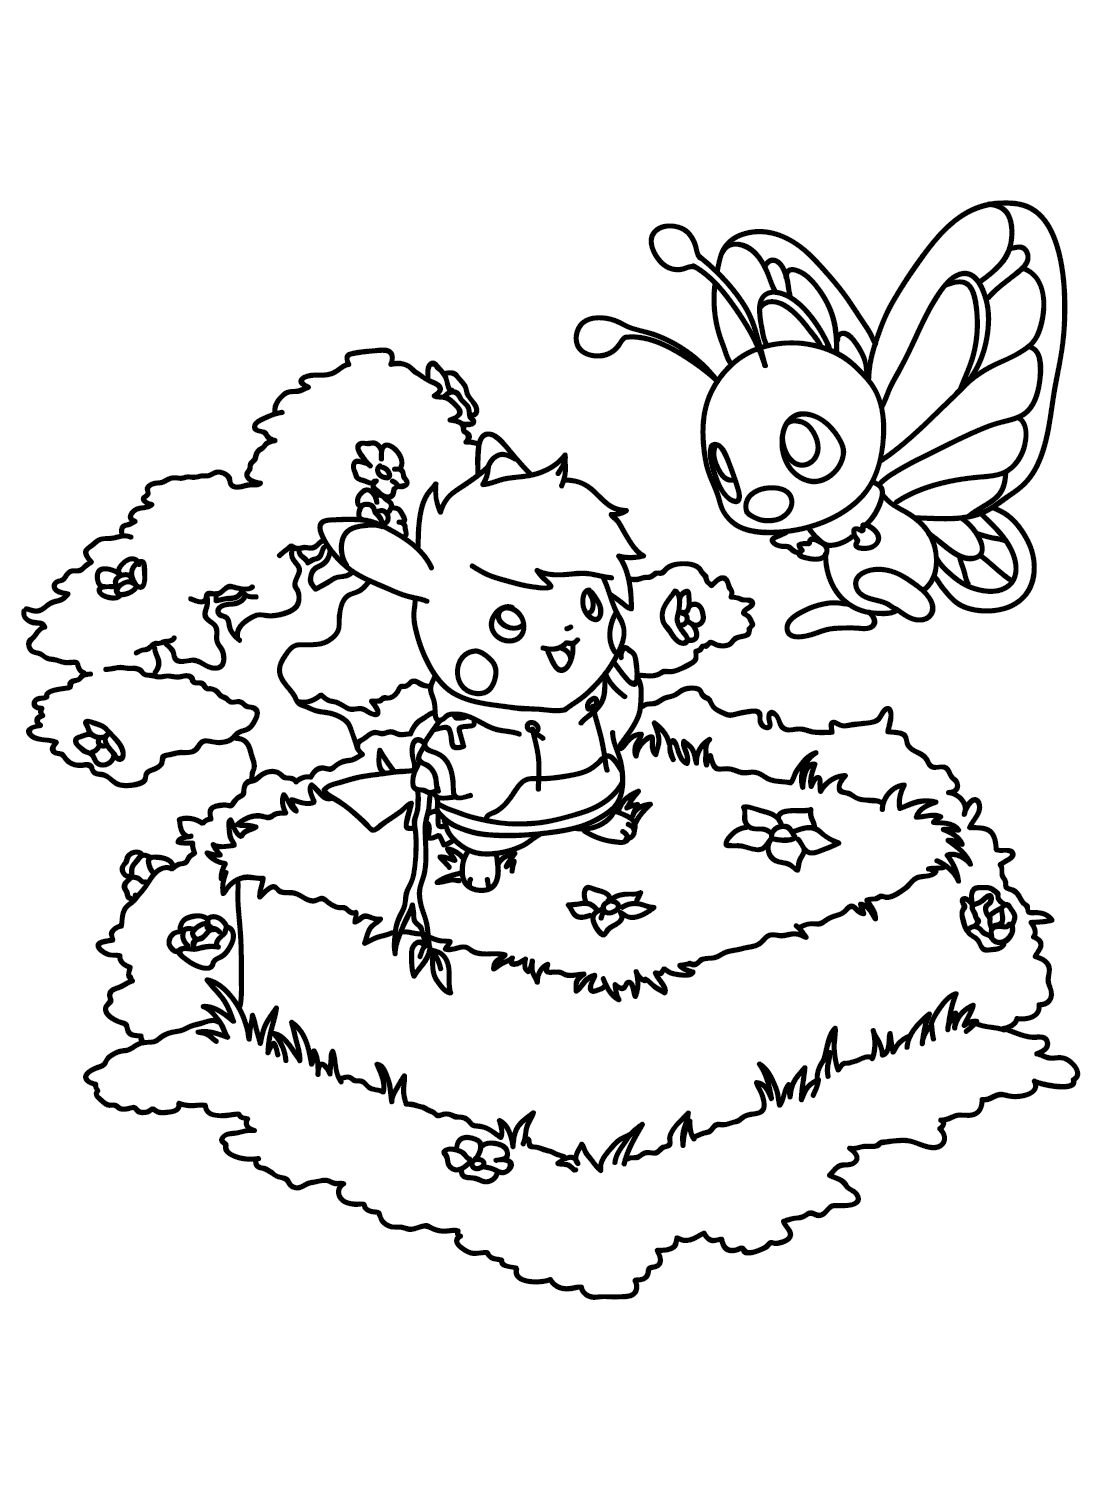 Butterfree and Pikachu Coloring Page